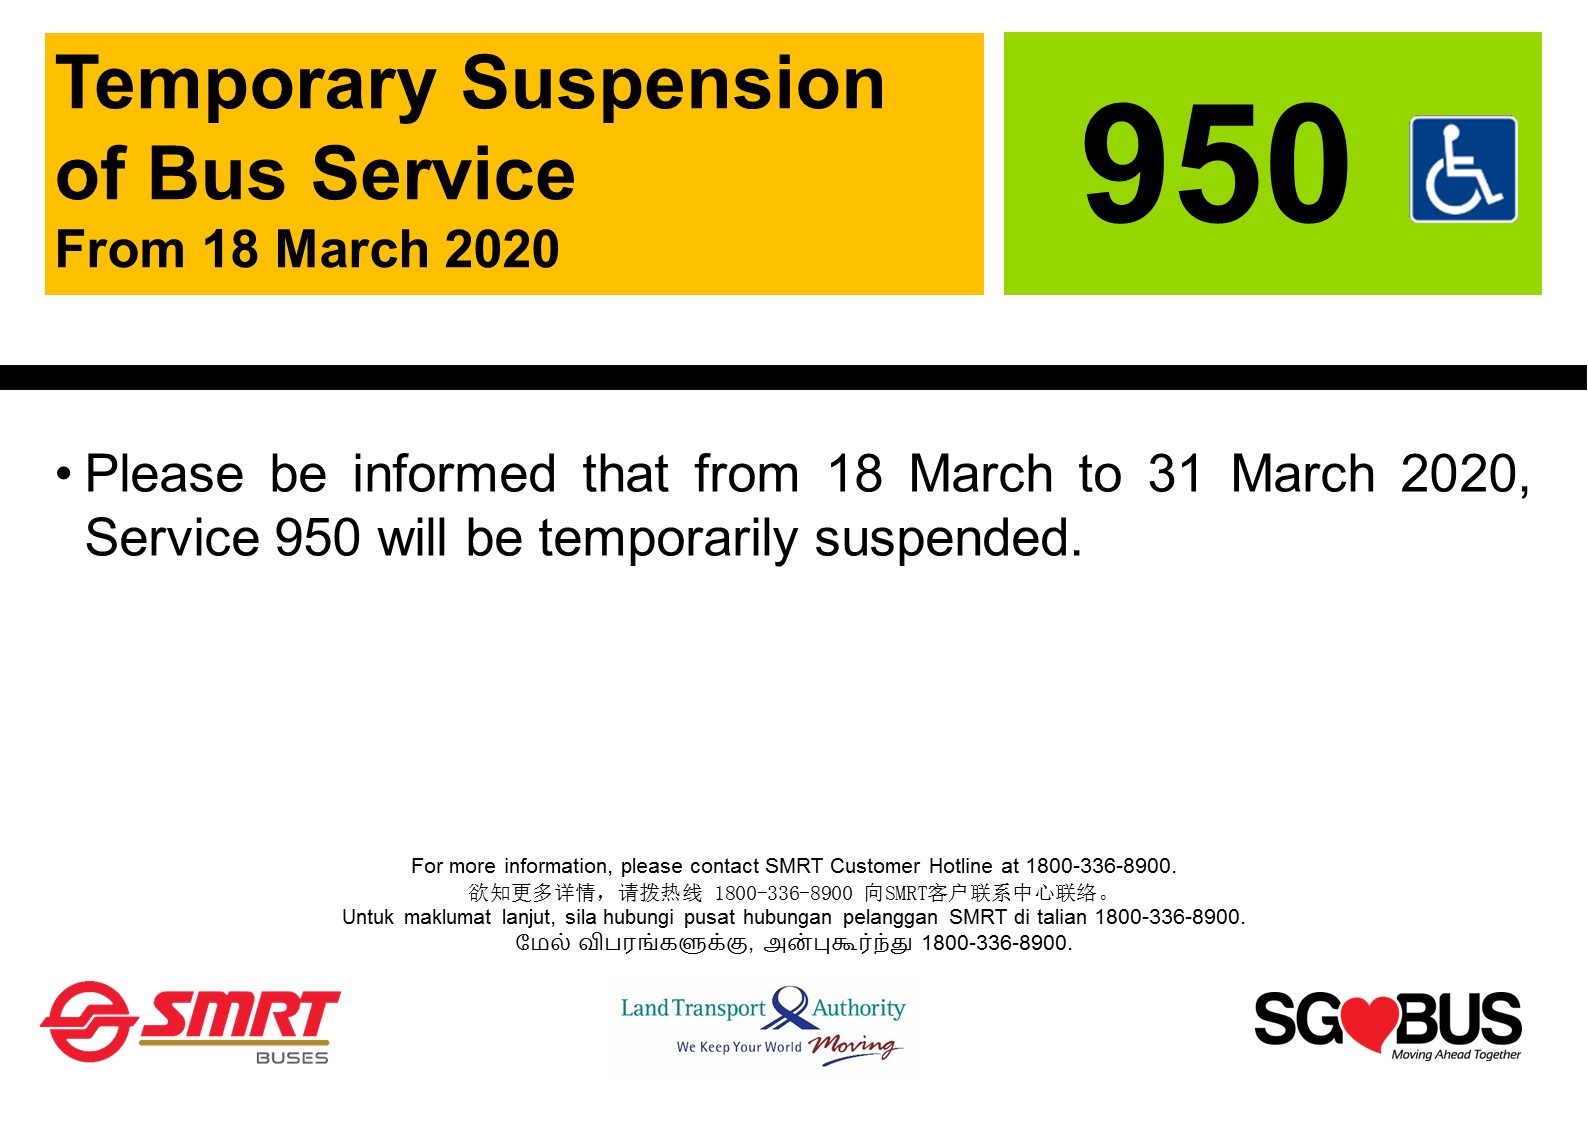 Initial suspension from 18 March 2020 to 31 March 2020 for SMRT Bus 950